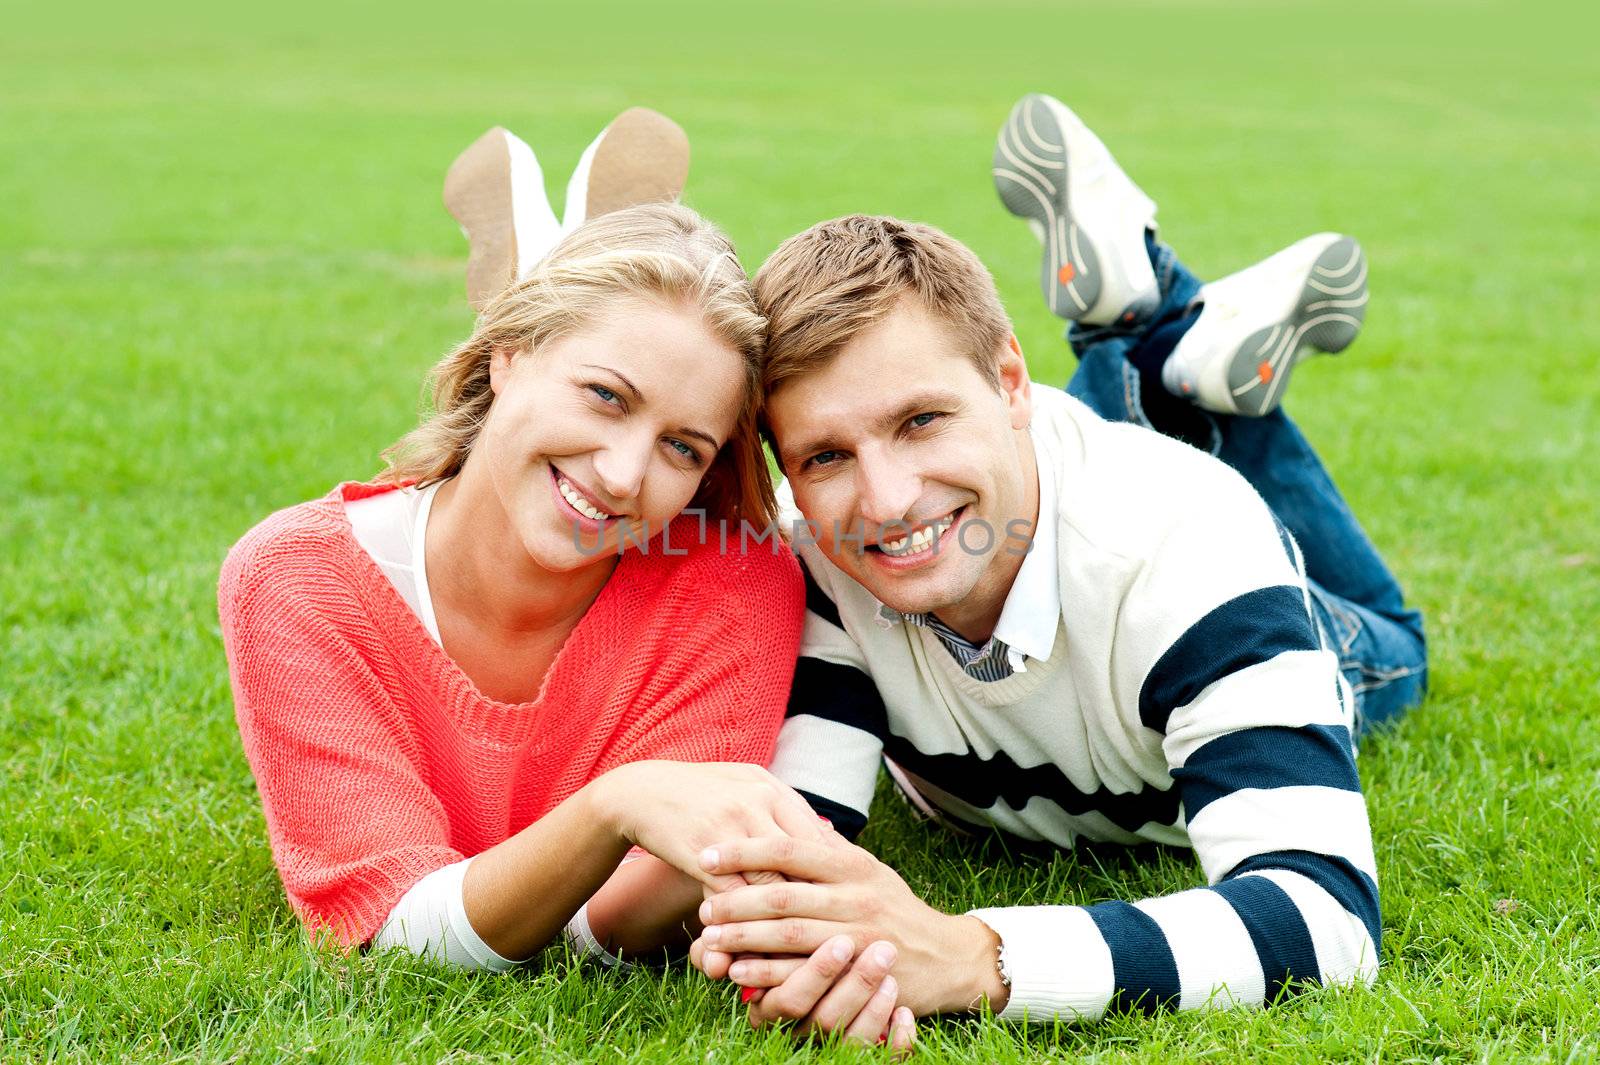 Couple outdoors enjoying the fresh air. Facing camera with a smile